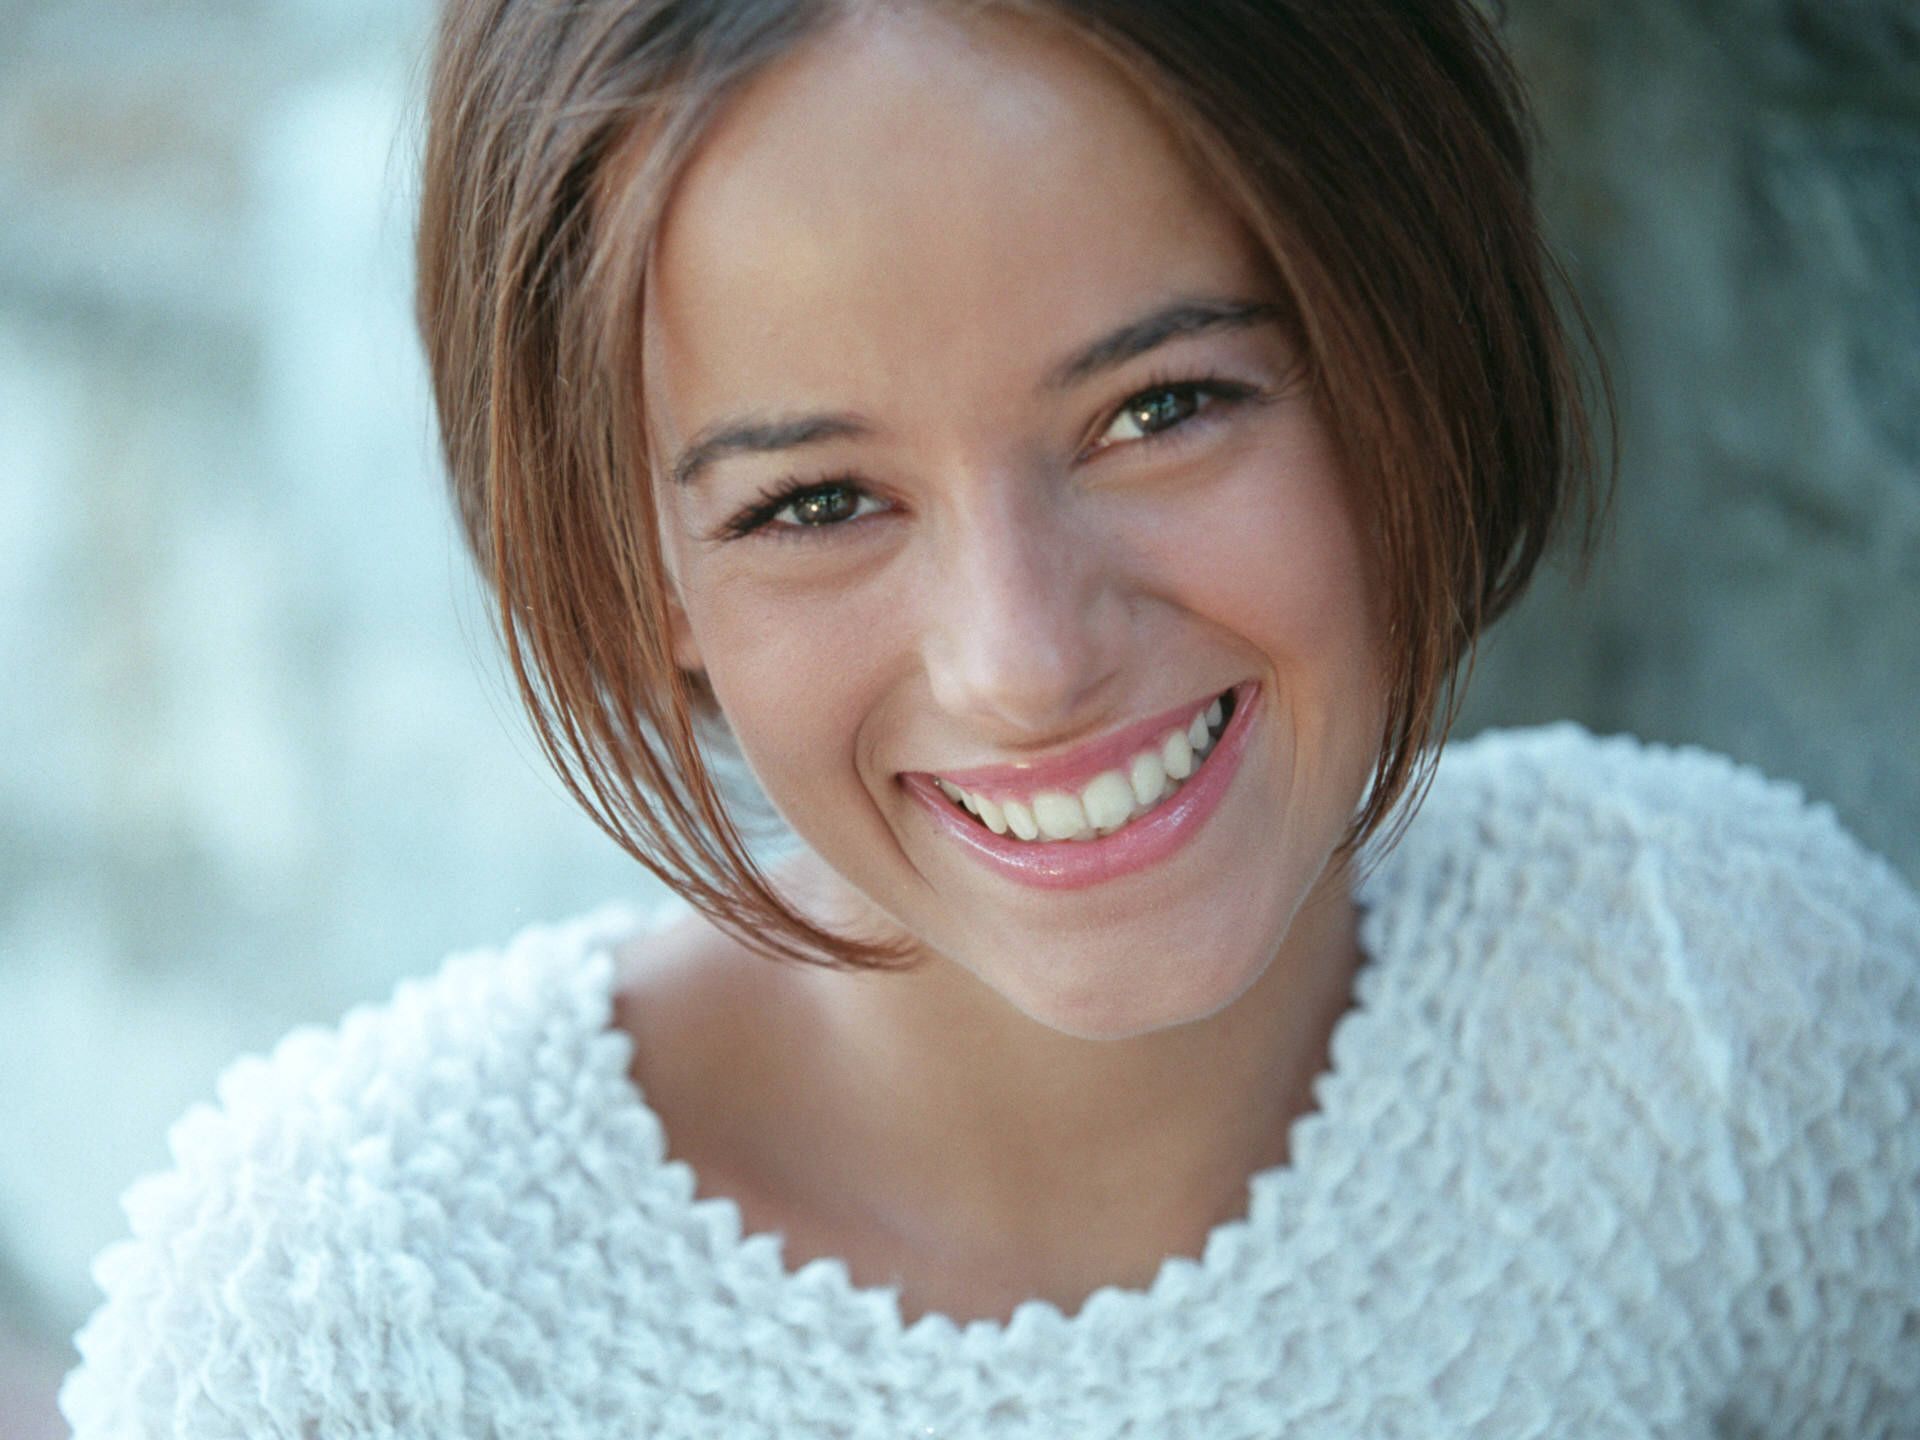 Alizee French singer beautiful girl Wallpapers - HD Wallpapers 86736